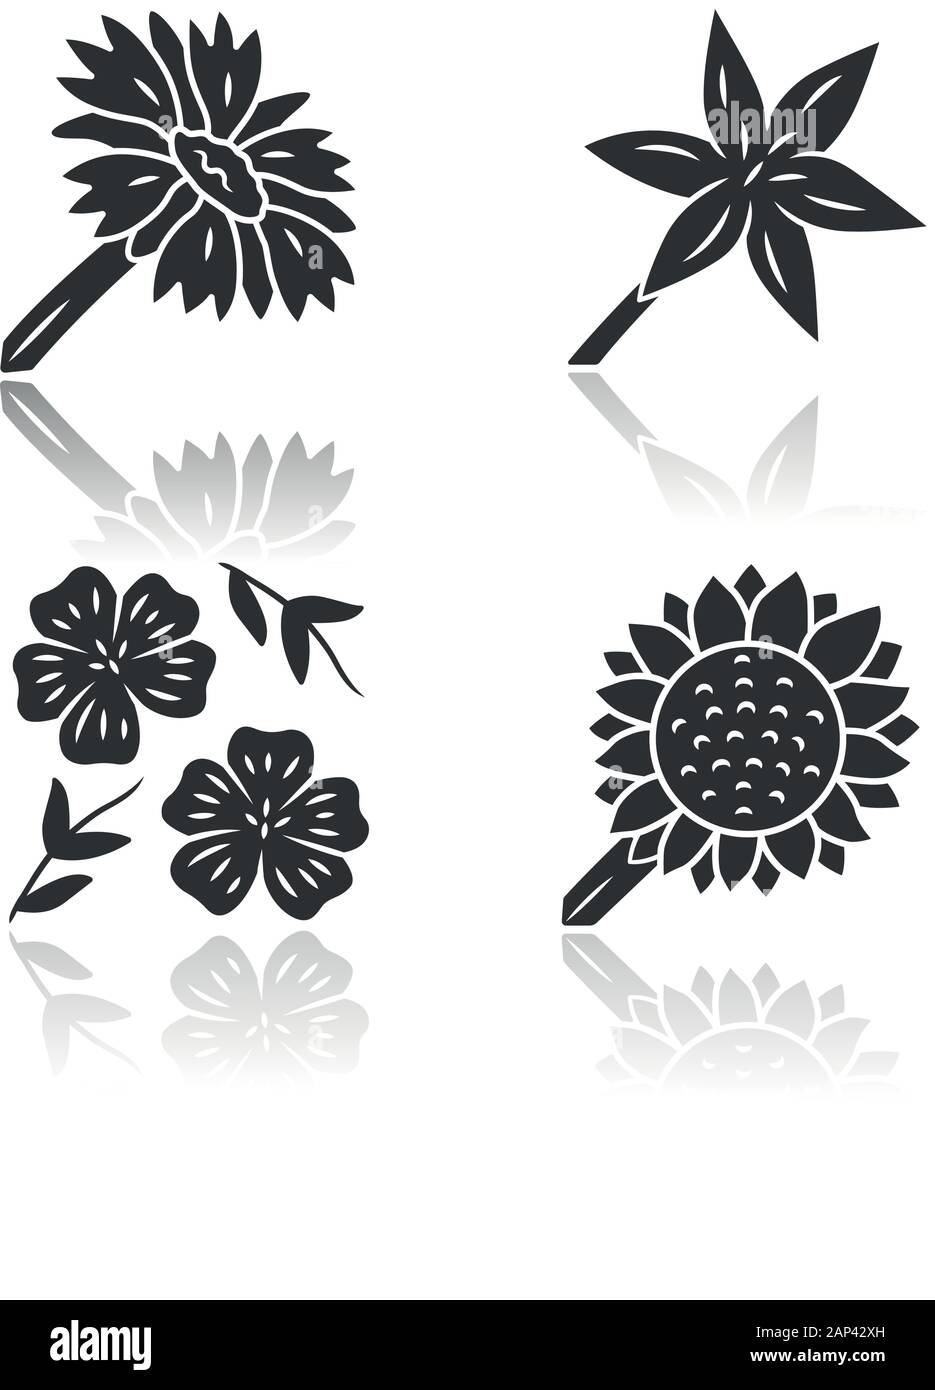 Wild flowers drop shadow black glyph icons set. Common star lily, blue flax, helianthus, blanket flower. Blooming wildflowers. Field, meadow herbaceou Stock Vector